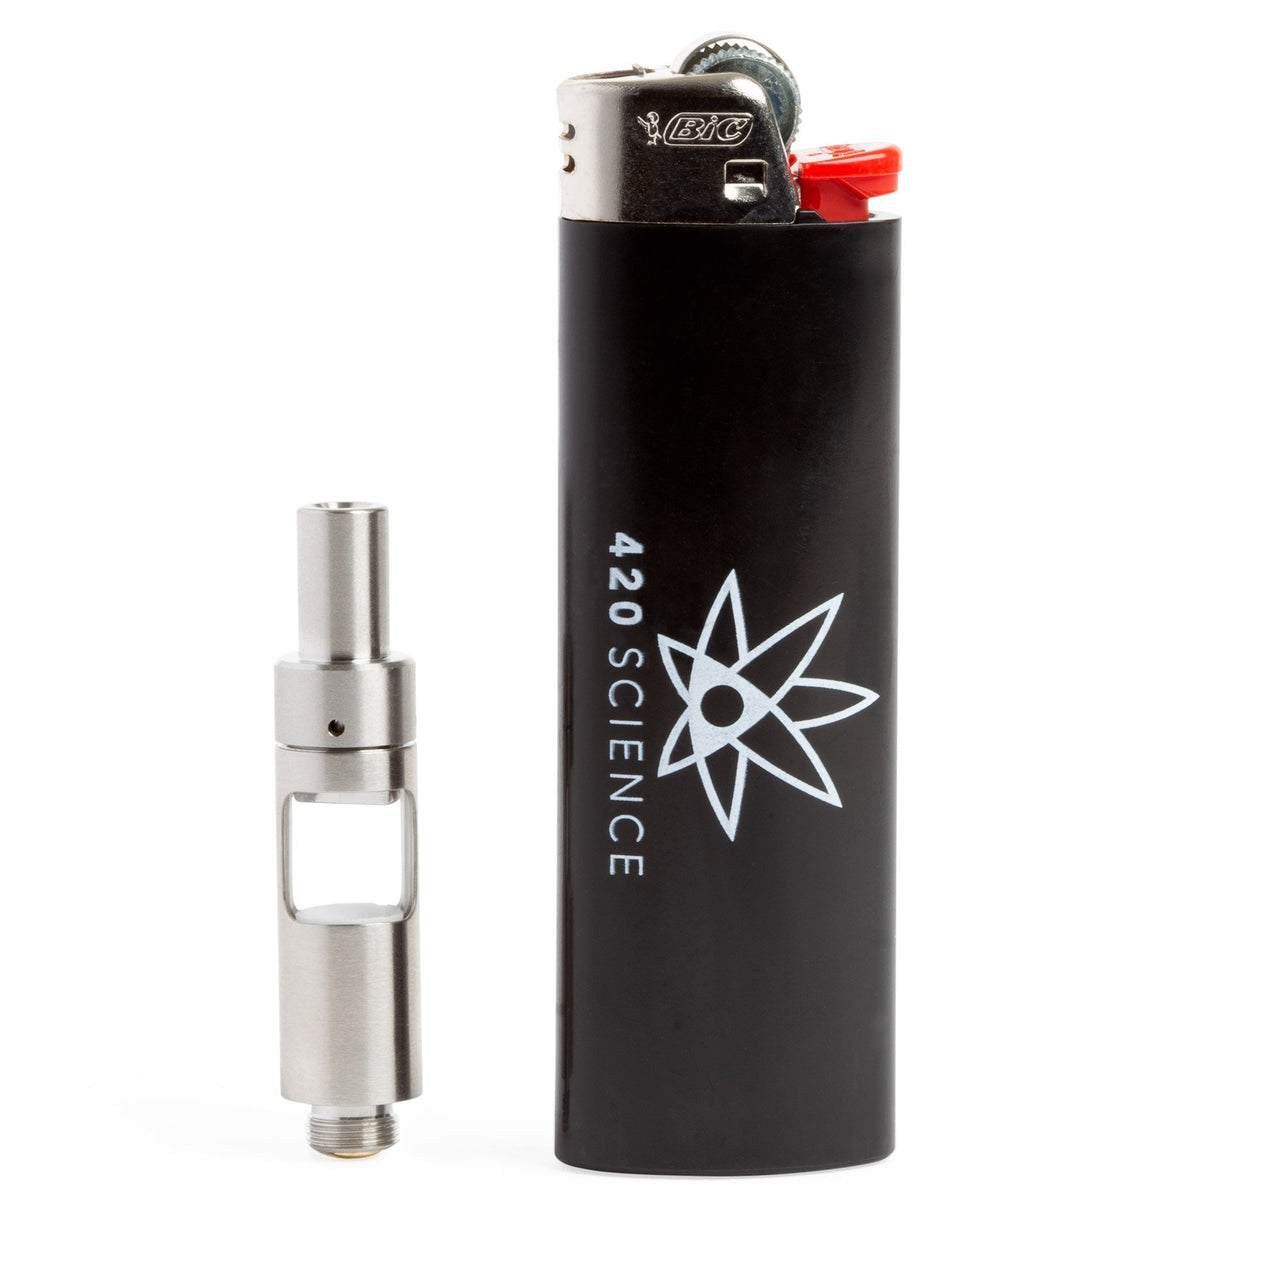 LINX Ember Atomizer - 420 Science - The most trusted online smoke shop.